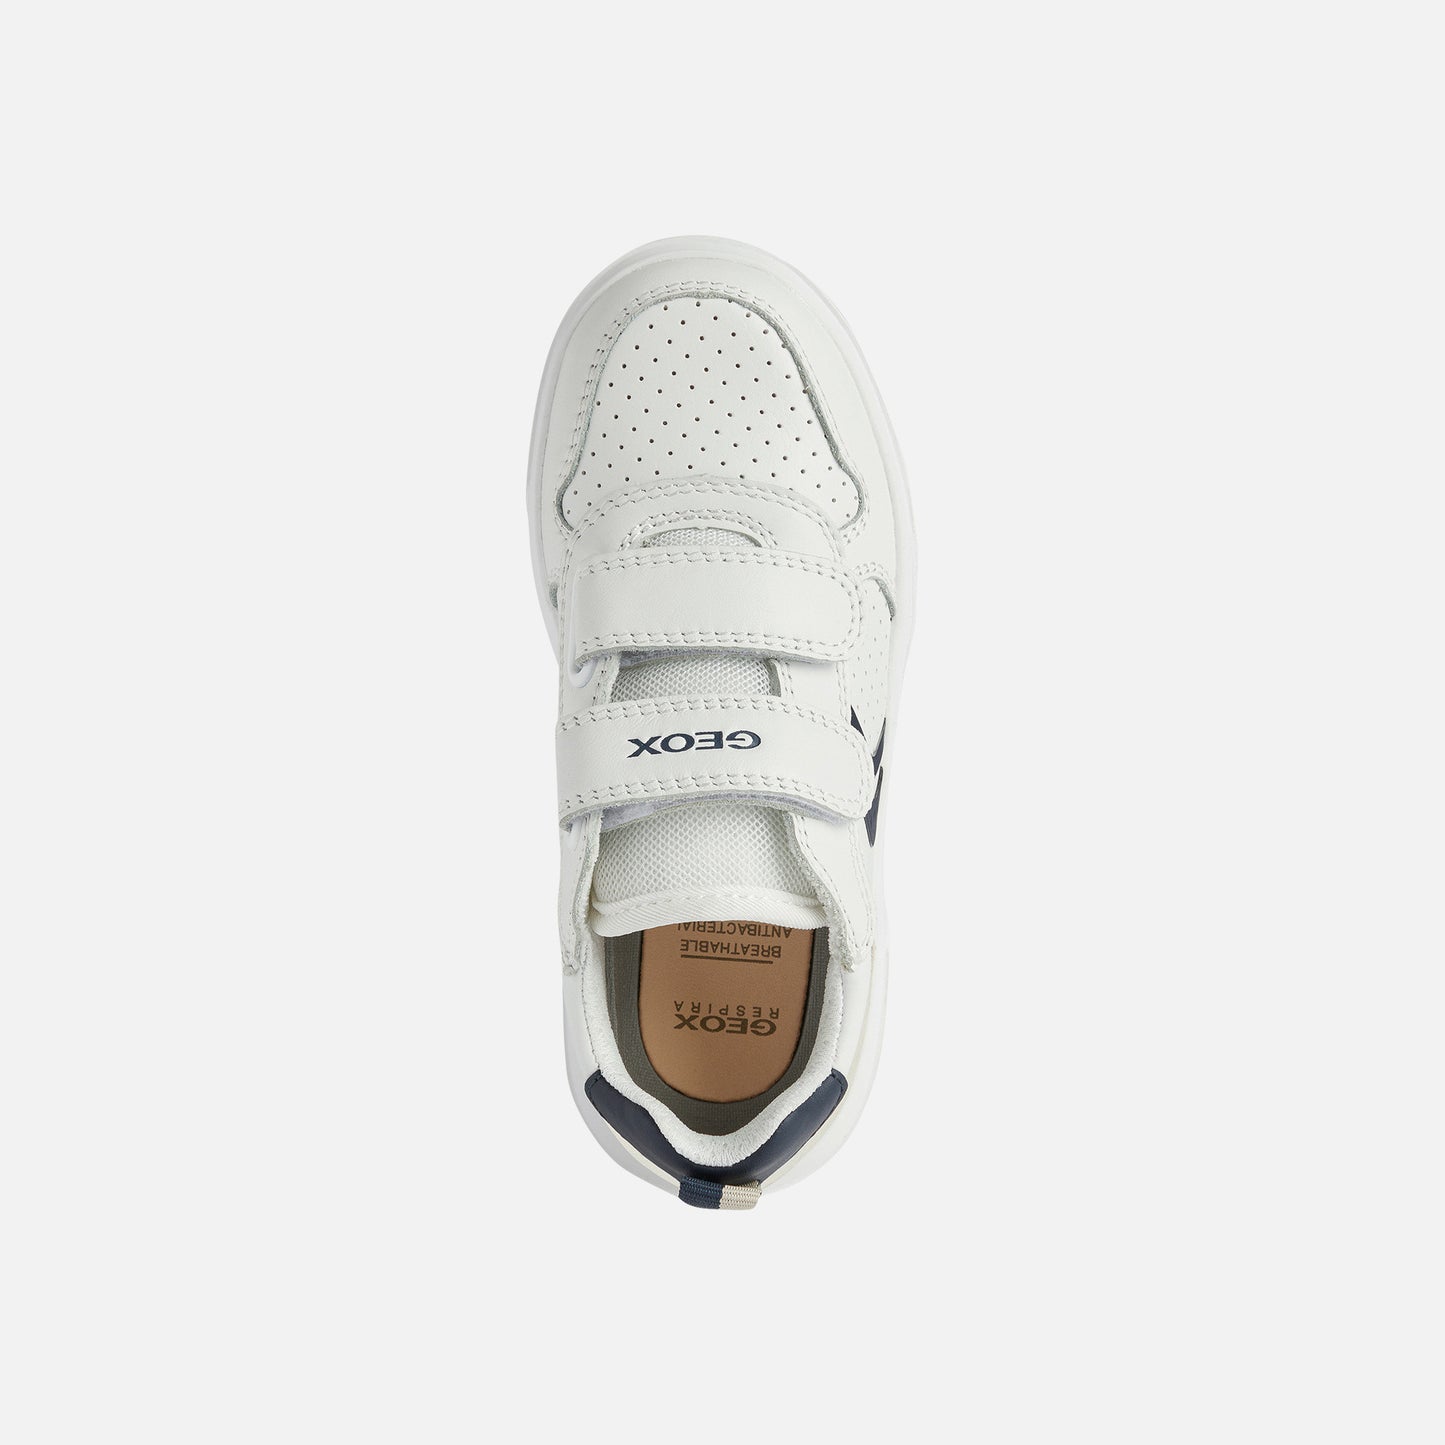 A casual boys trainer by Geox, style Nettuno, in white and navy with double velcro fastening. Above  view.